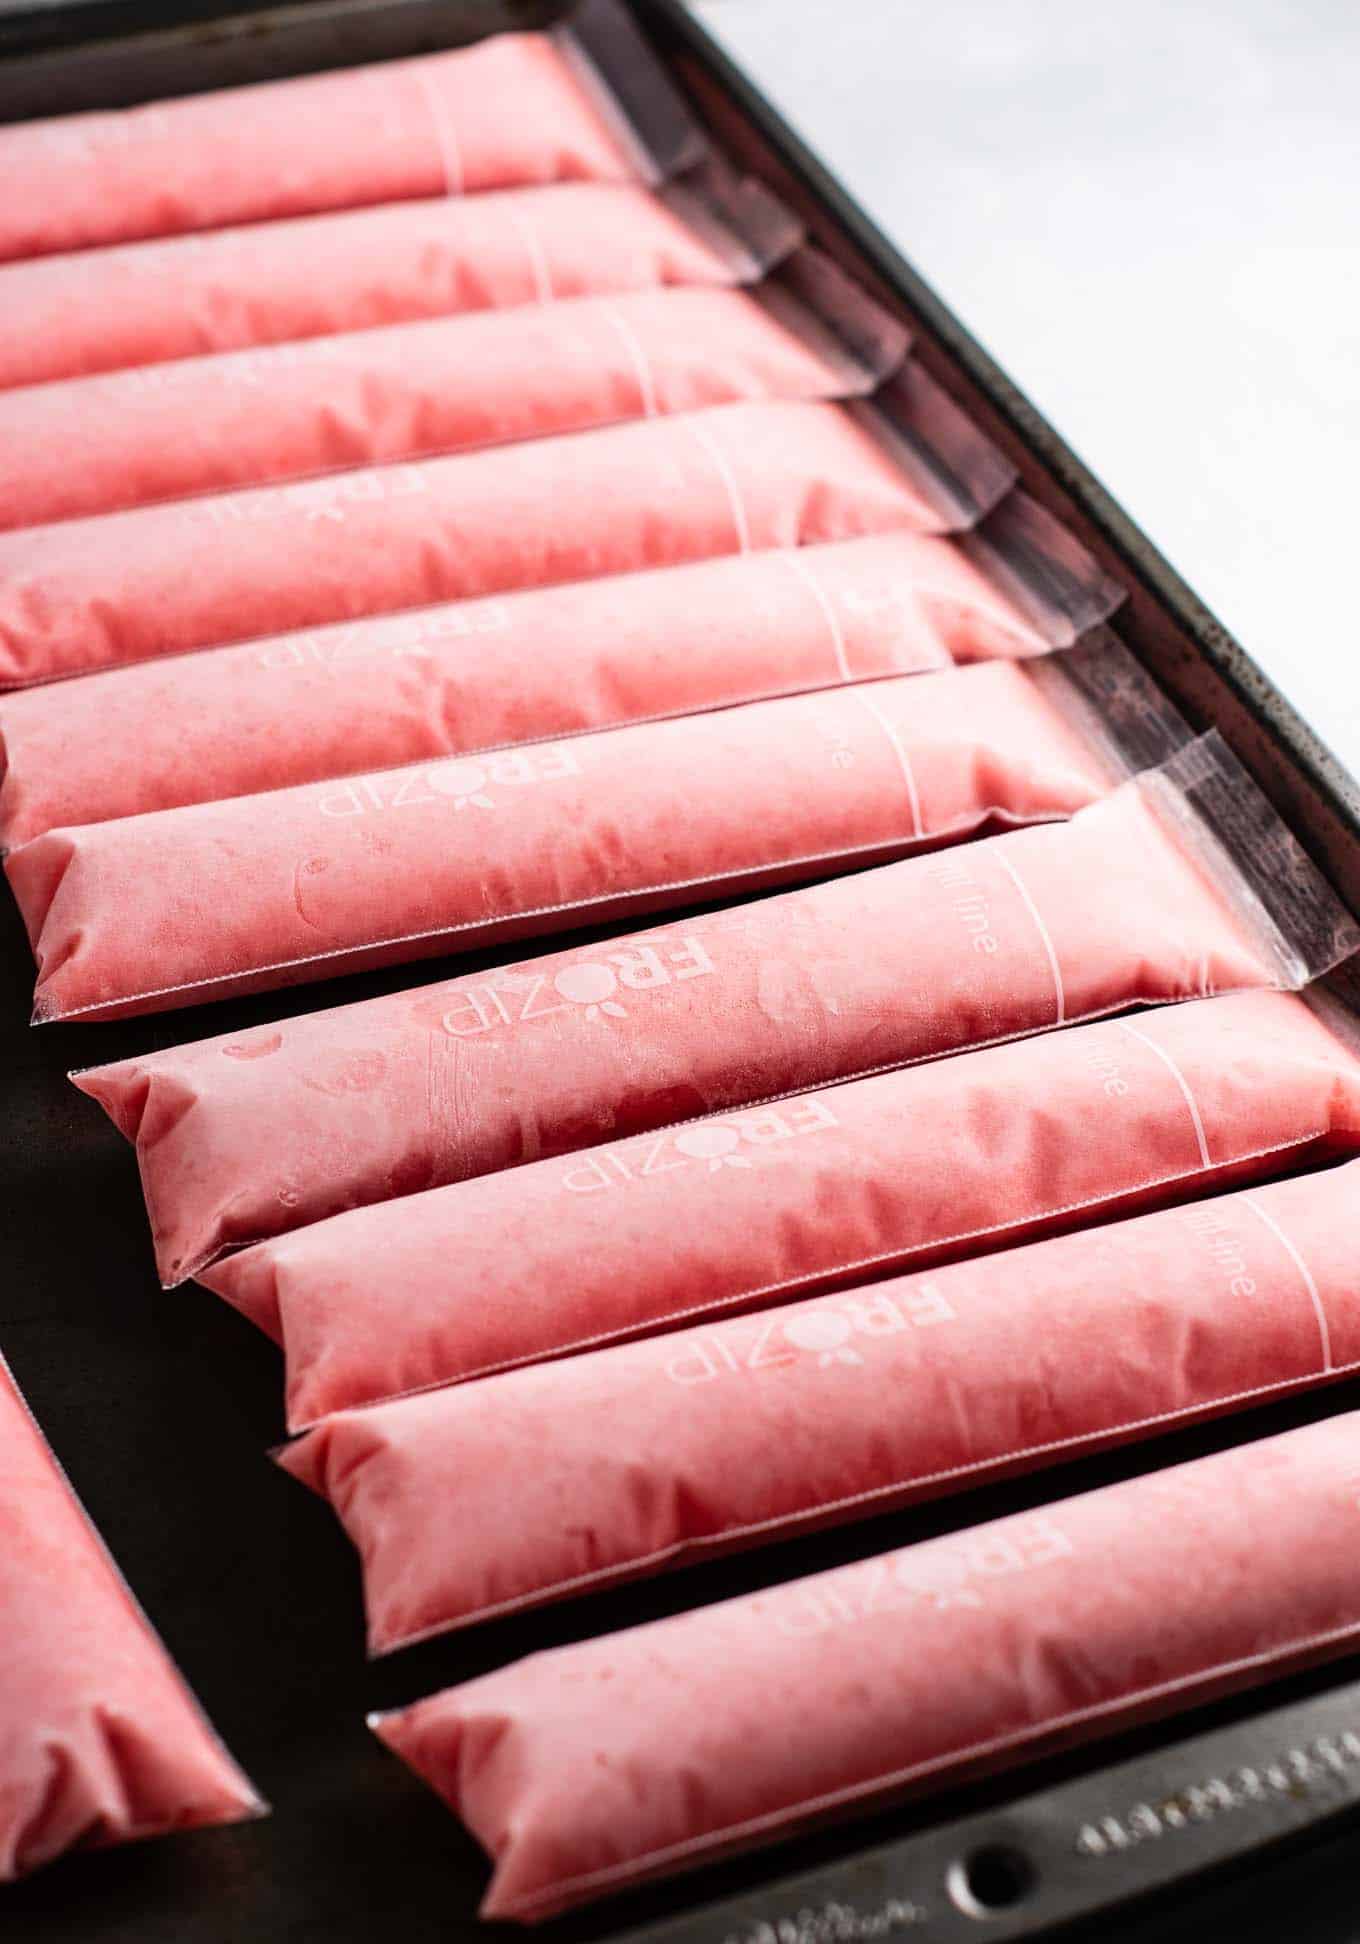 Strawberry pineapple freezer pops – learn how to make popsicles with just frozen fruit, coconut water and maple syrup! #freezerpops #healthy #icepops #popsicles #homemade #healthyrecipe #dessert #healthydessert #strawberrypineapple #summer